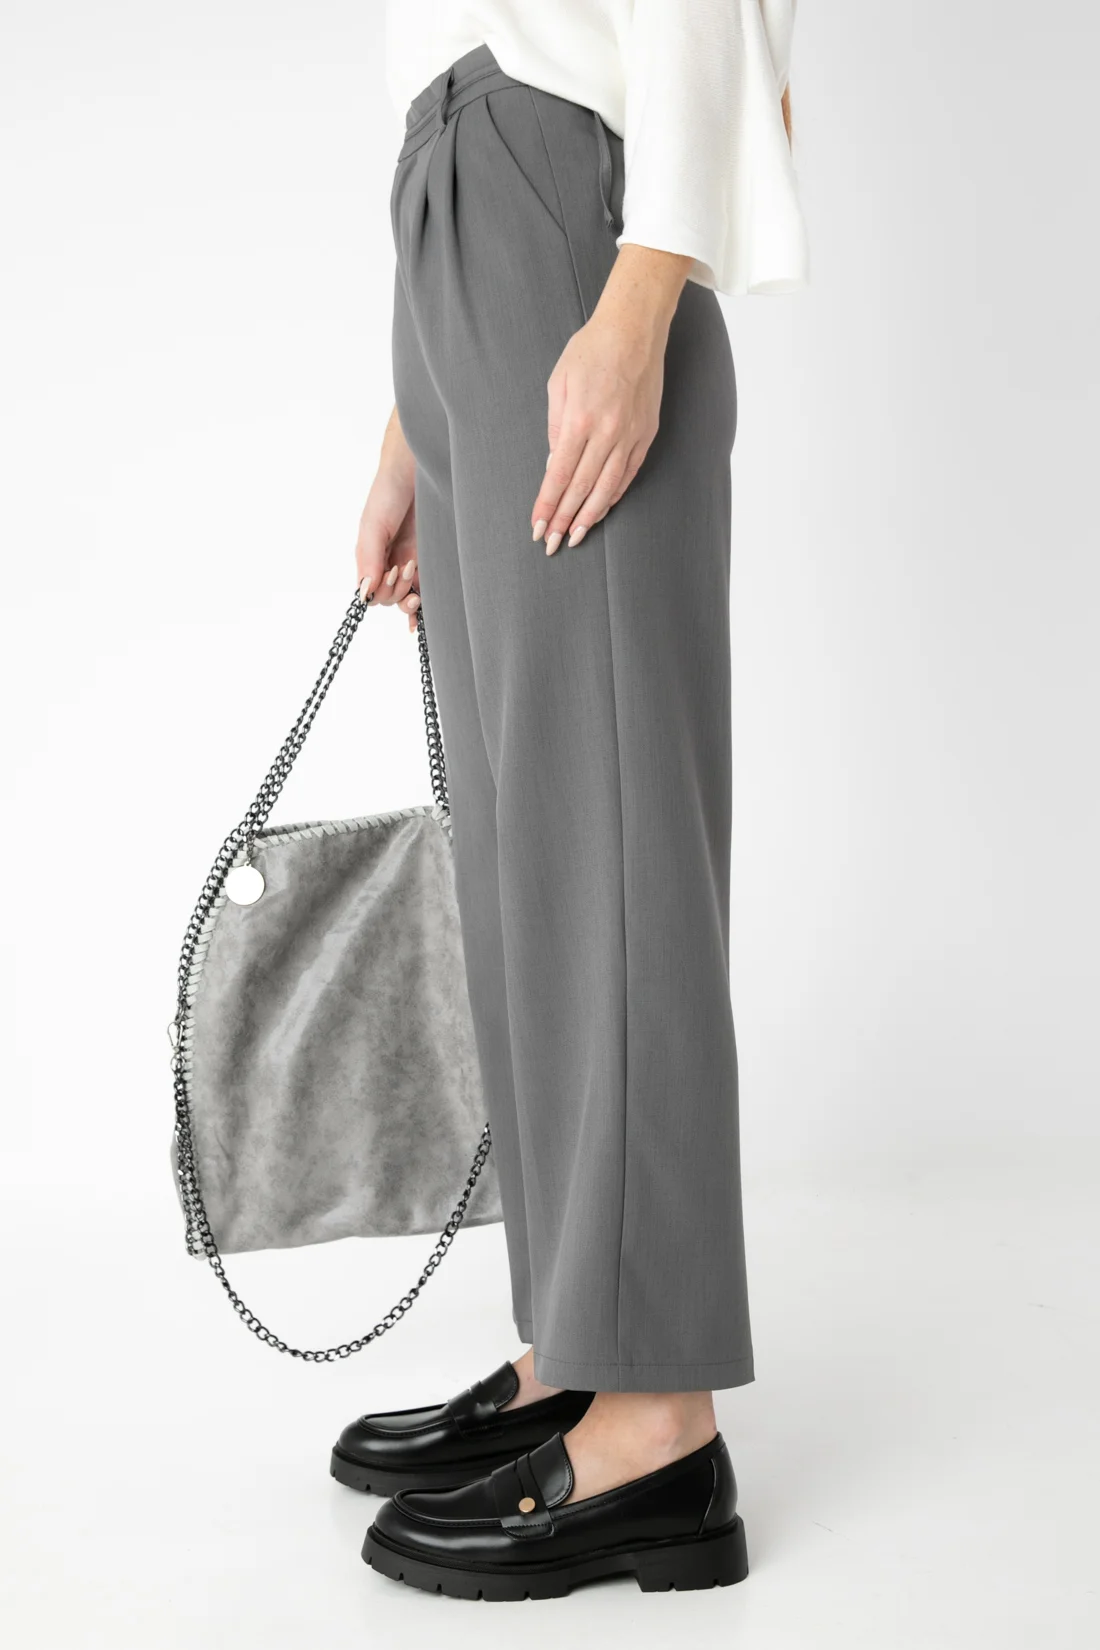 LOMERE TROUSERS - GREY